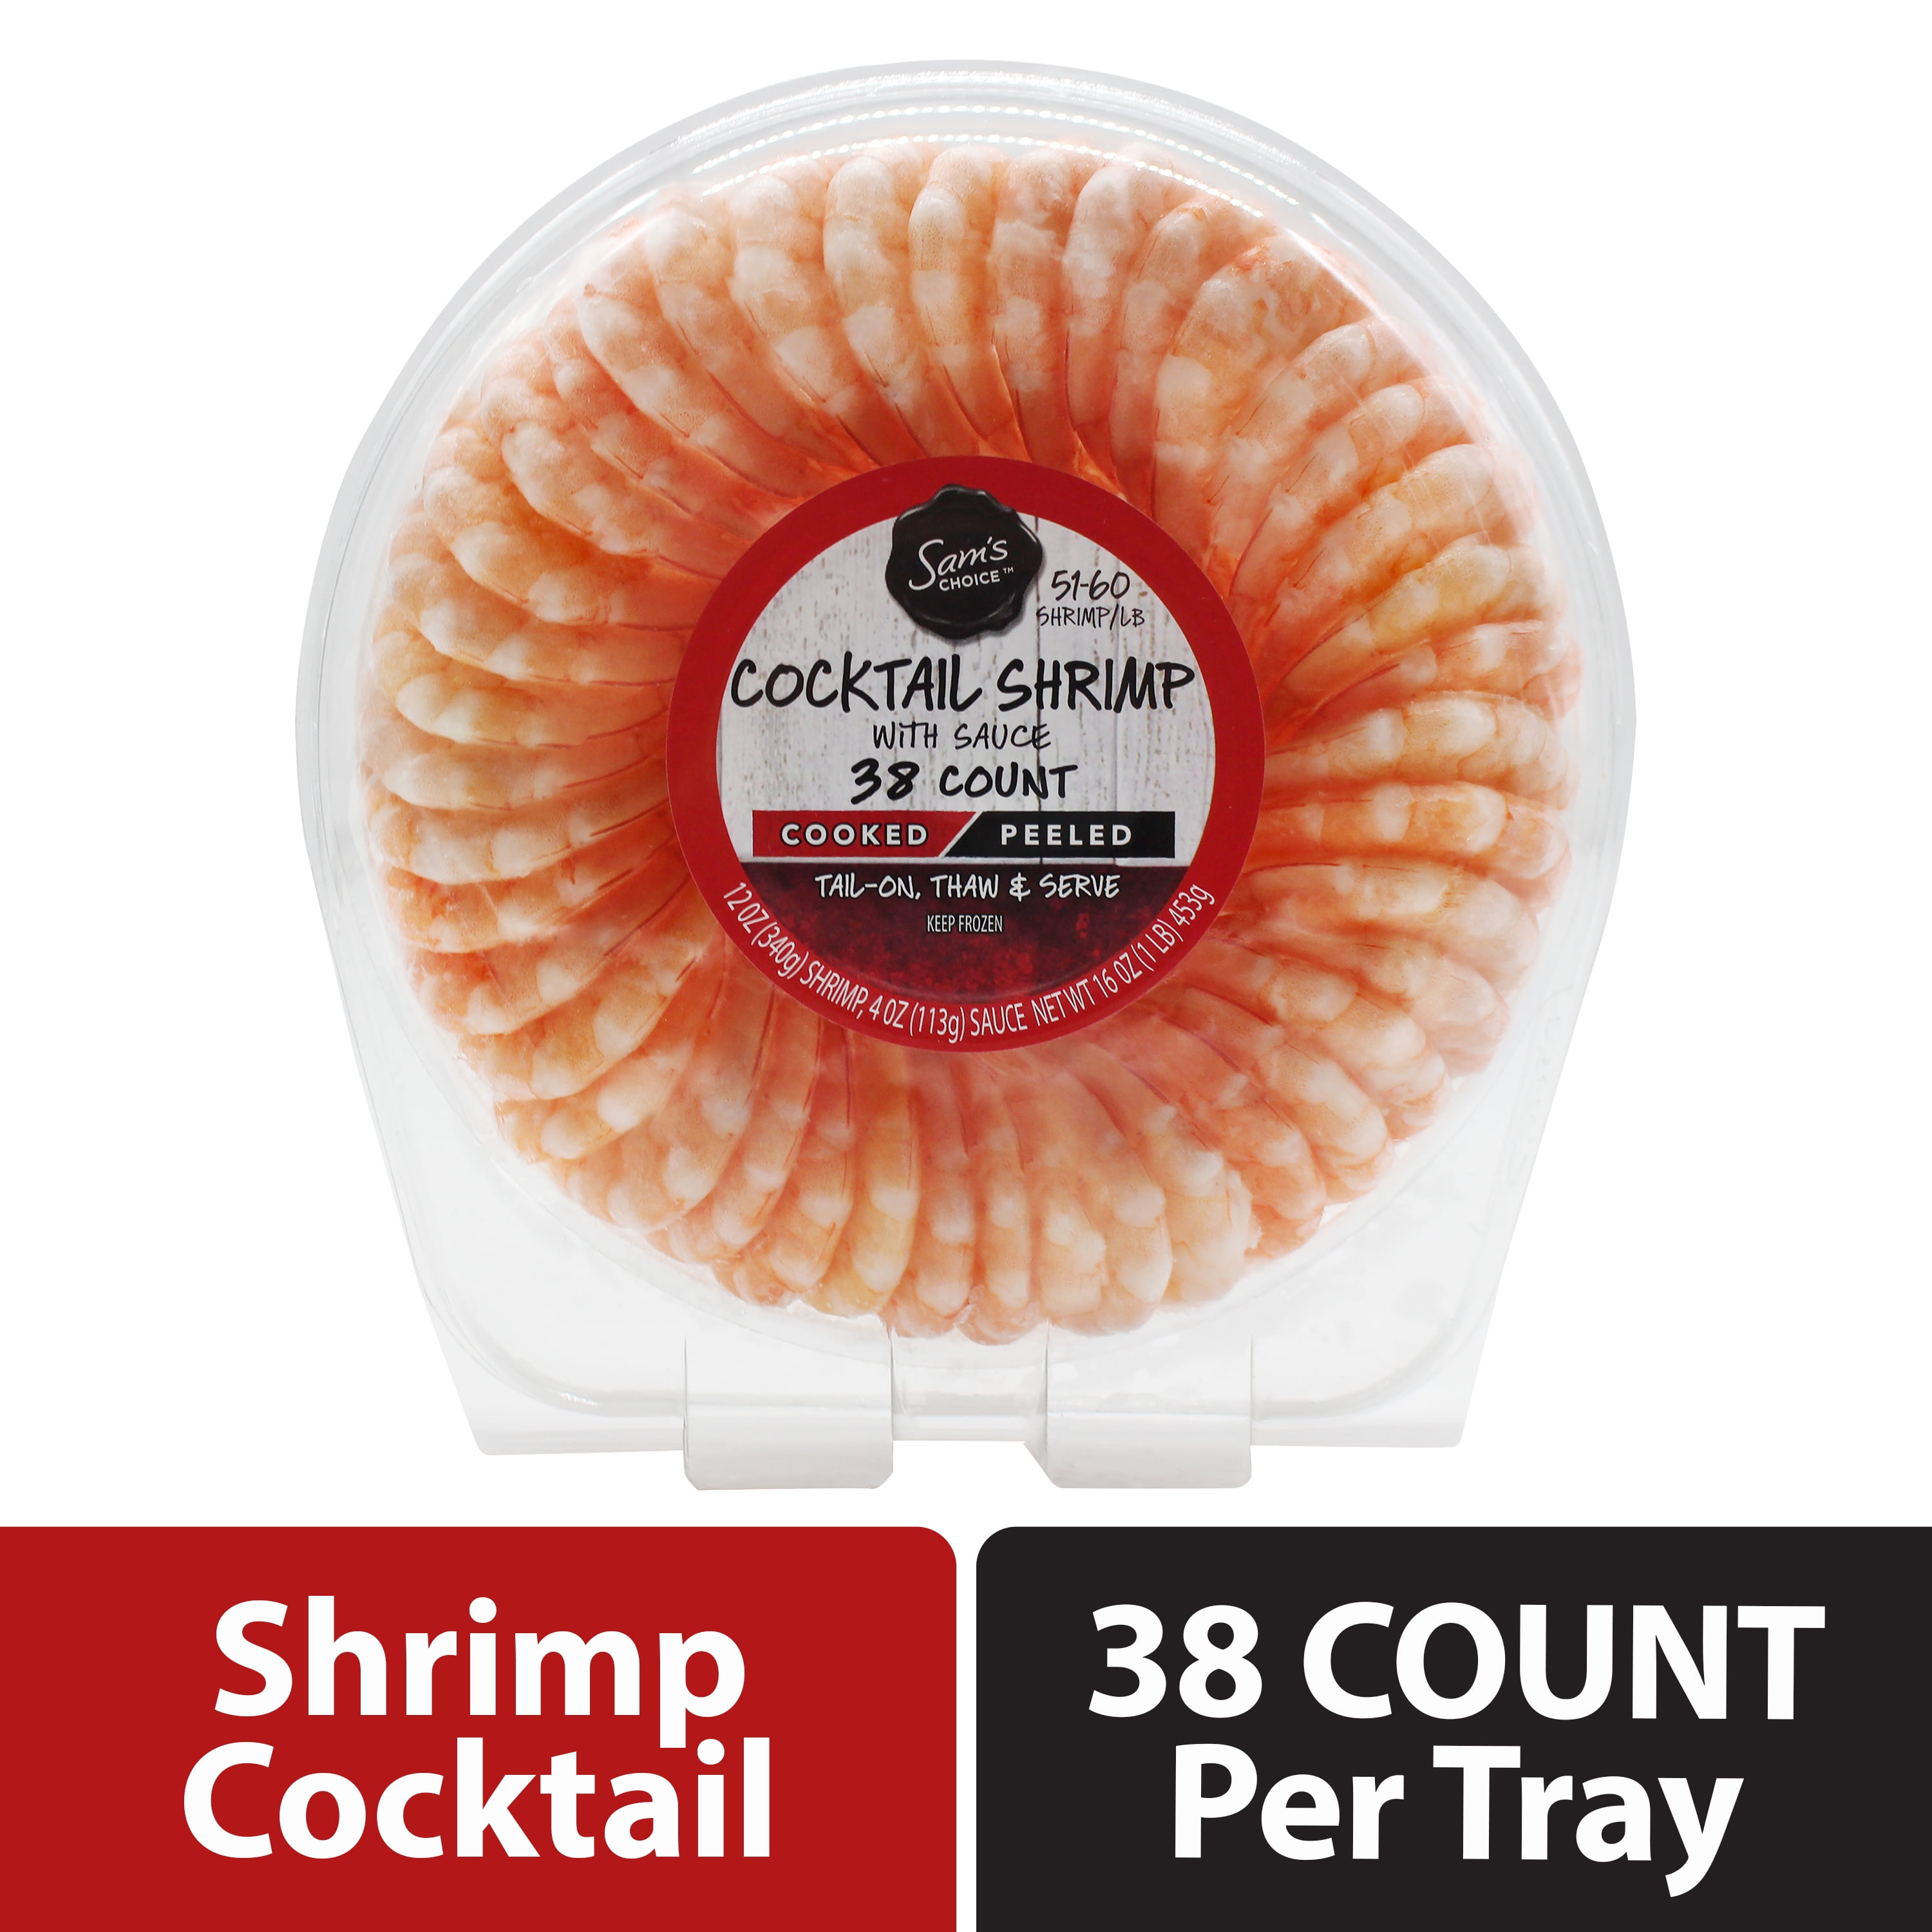 Sam's Choice Cooked Medium Shrimp Cocktail Ring with Sauce, 16 oz